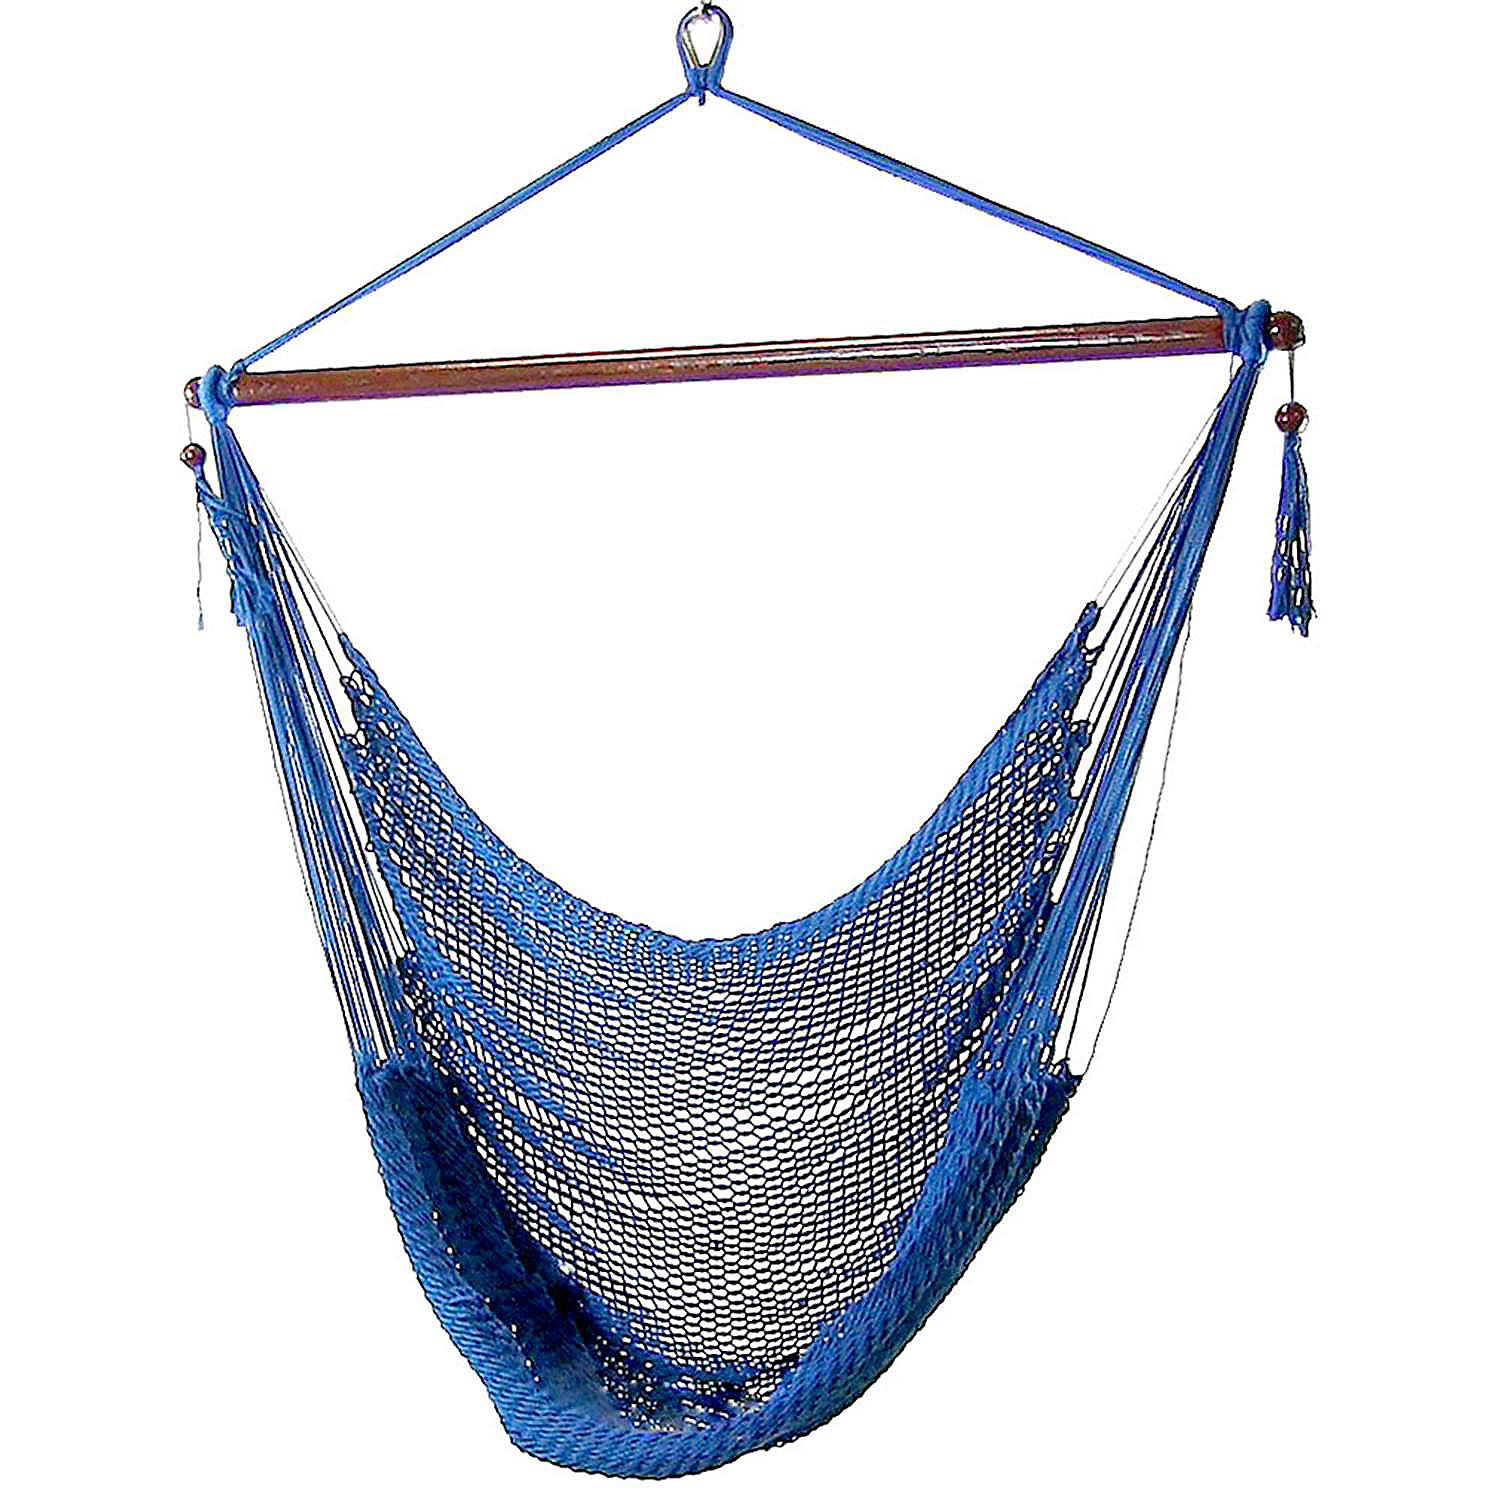 Extra Large Caribbean Sunnydaze Hanging Rope Hammock Chair Swing Sky Blue Yard and Porch for Outdoor Patio 